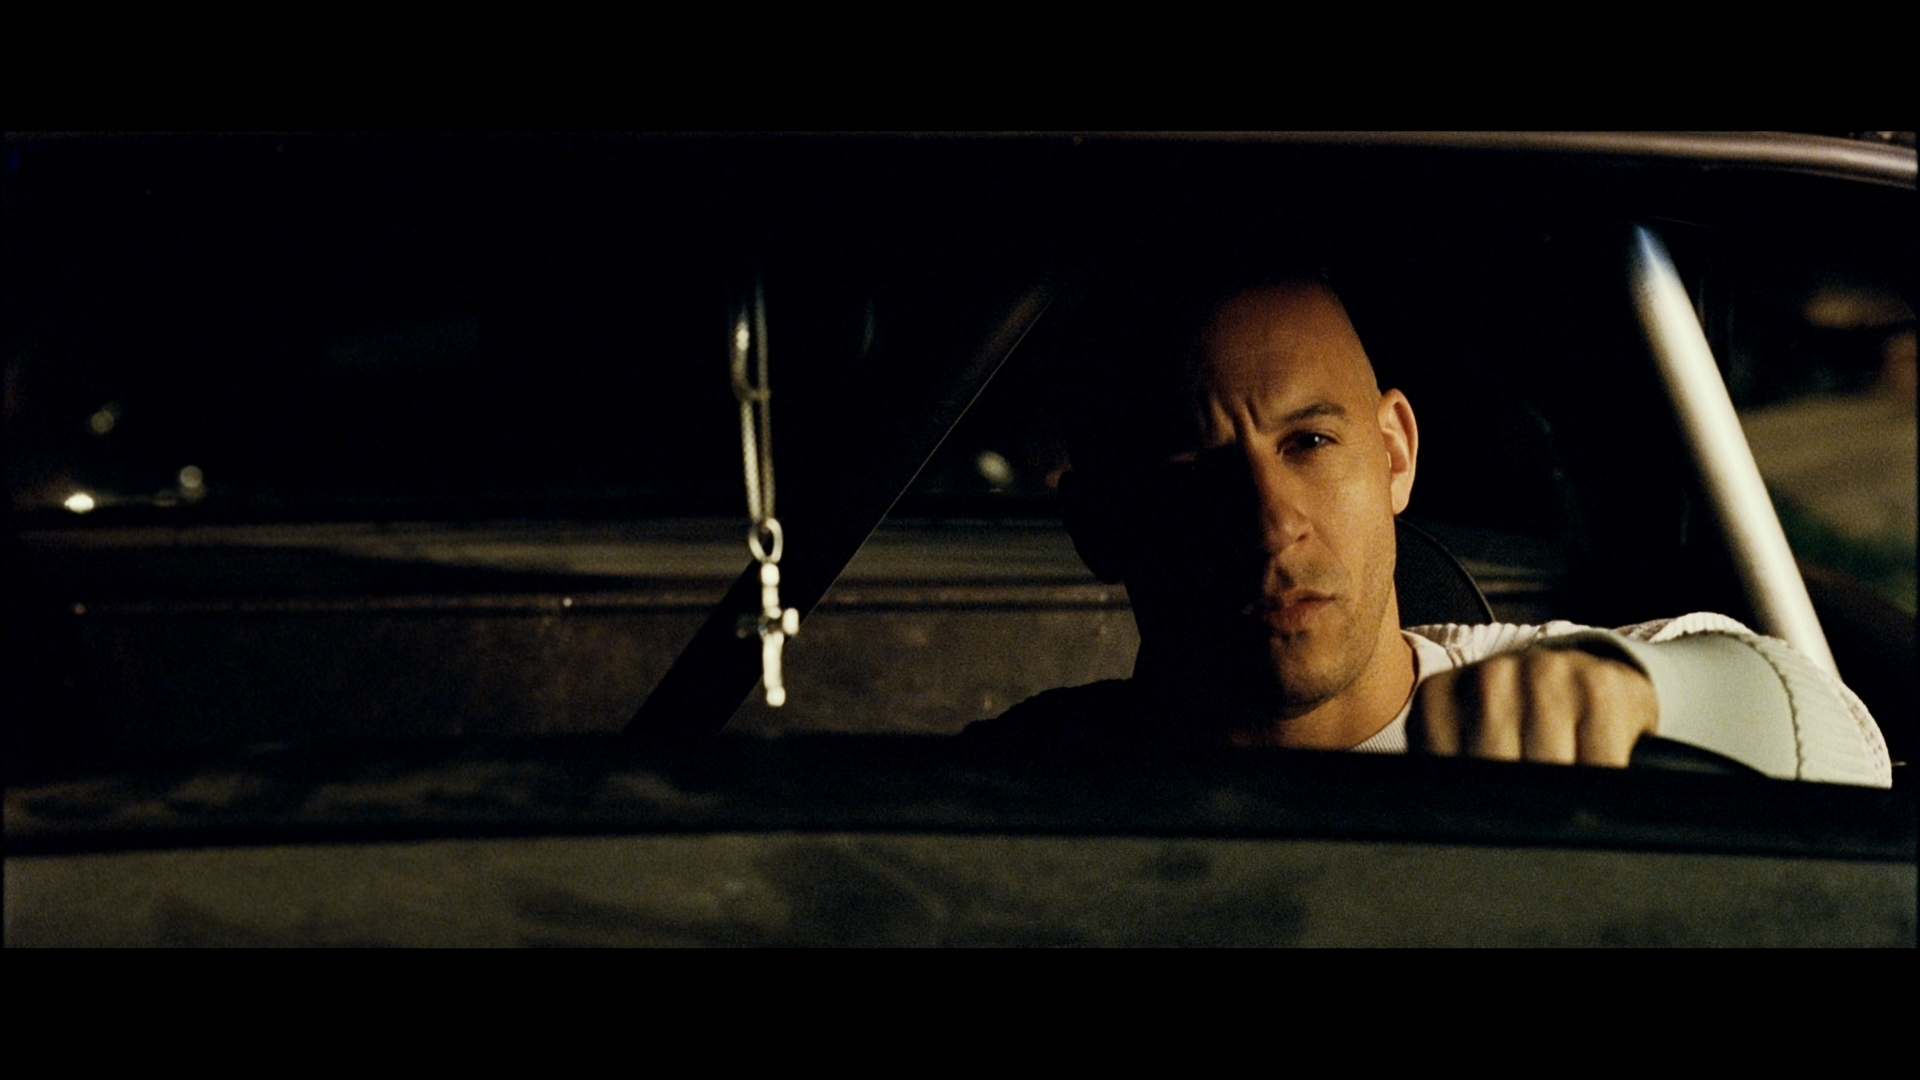 1920x1080 Vin Diesel in Fast and Furious Fast and Furious Photo (2176778) Fanpop Page 3